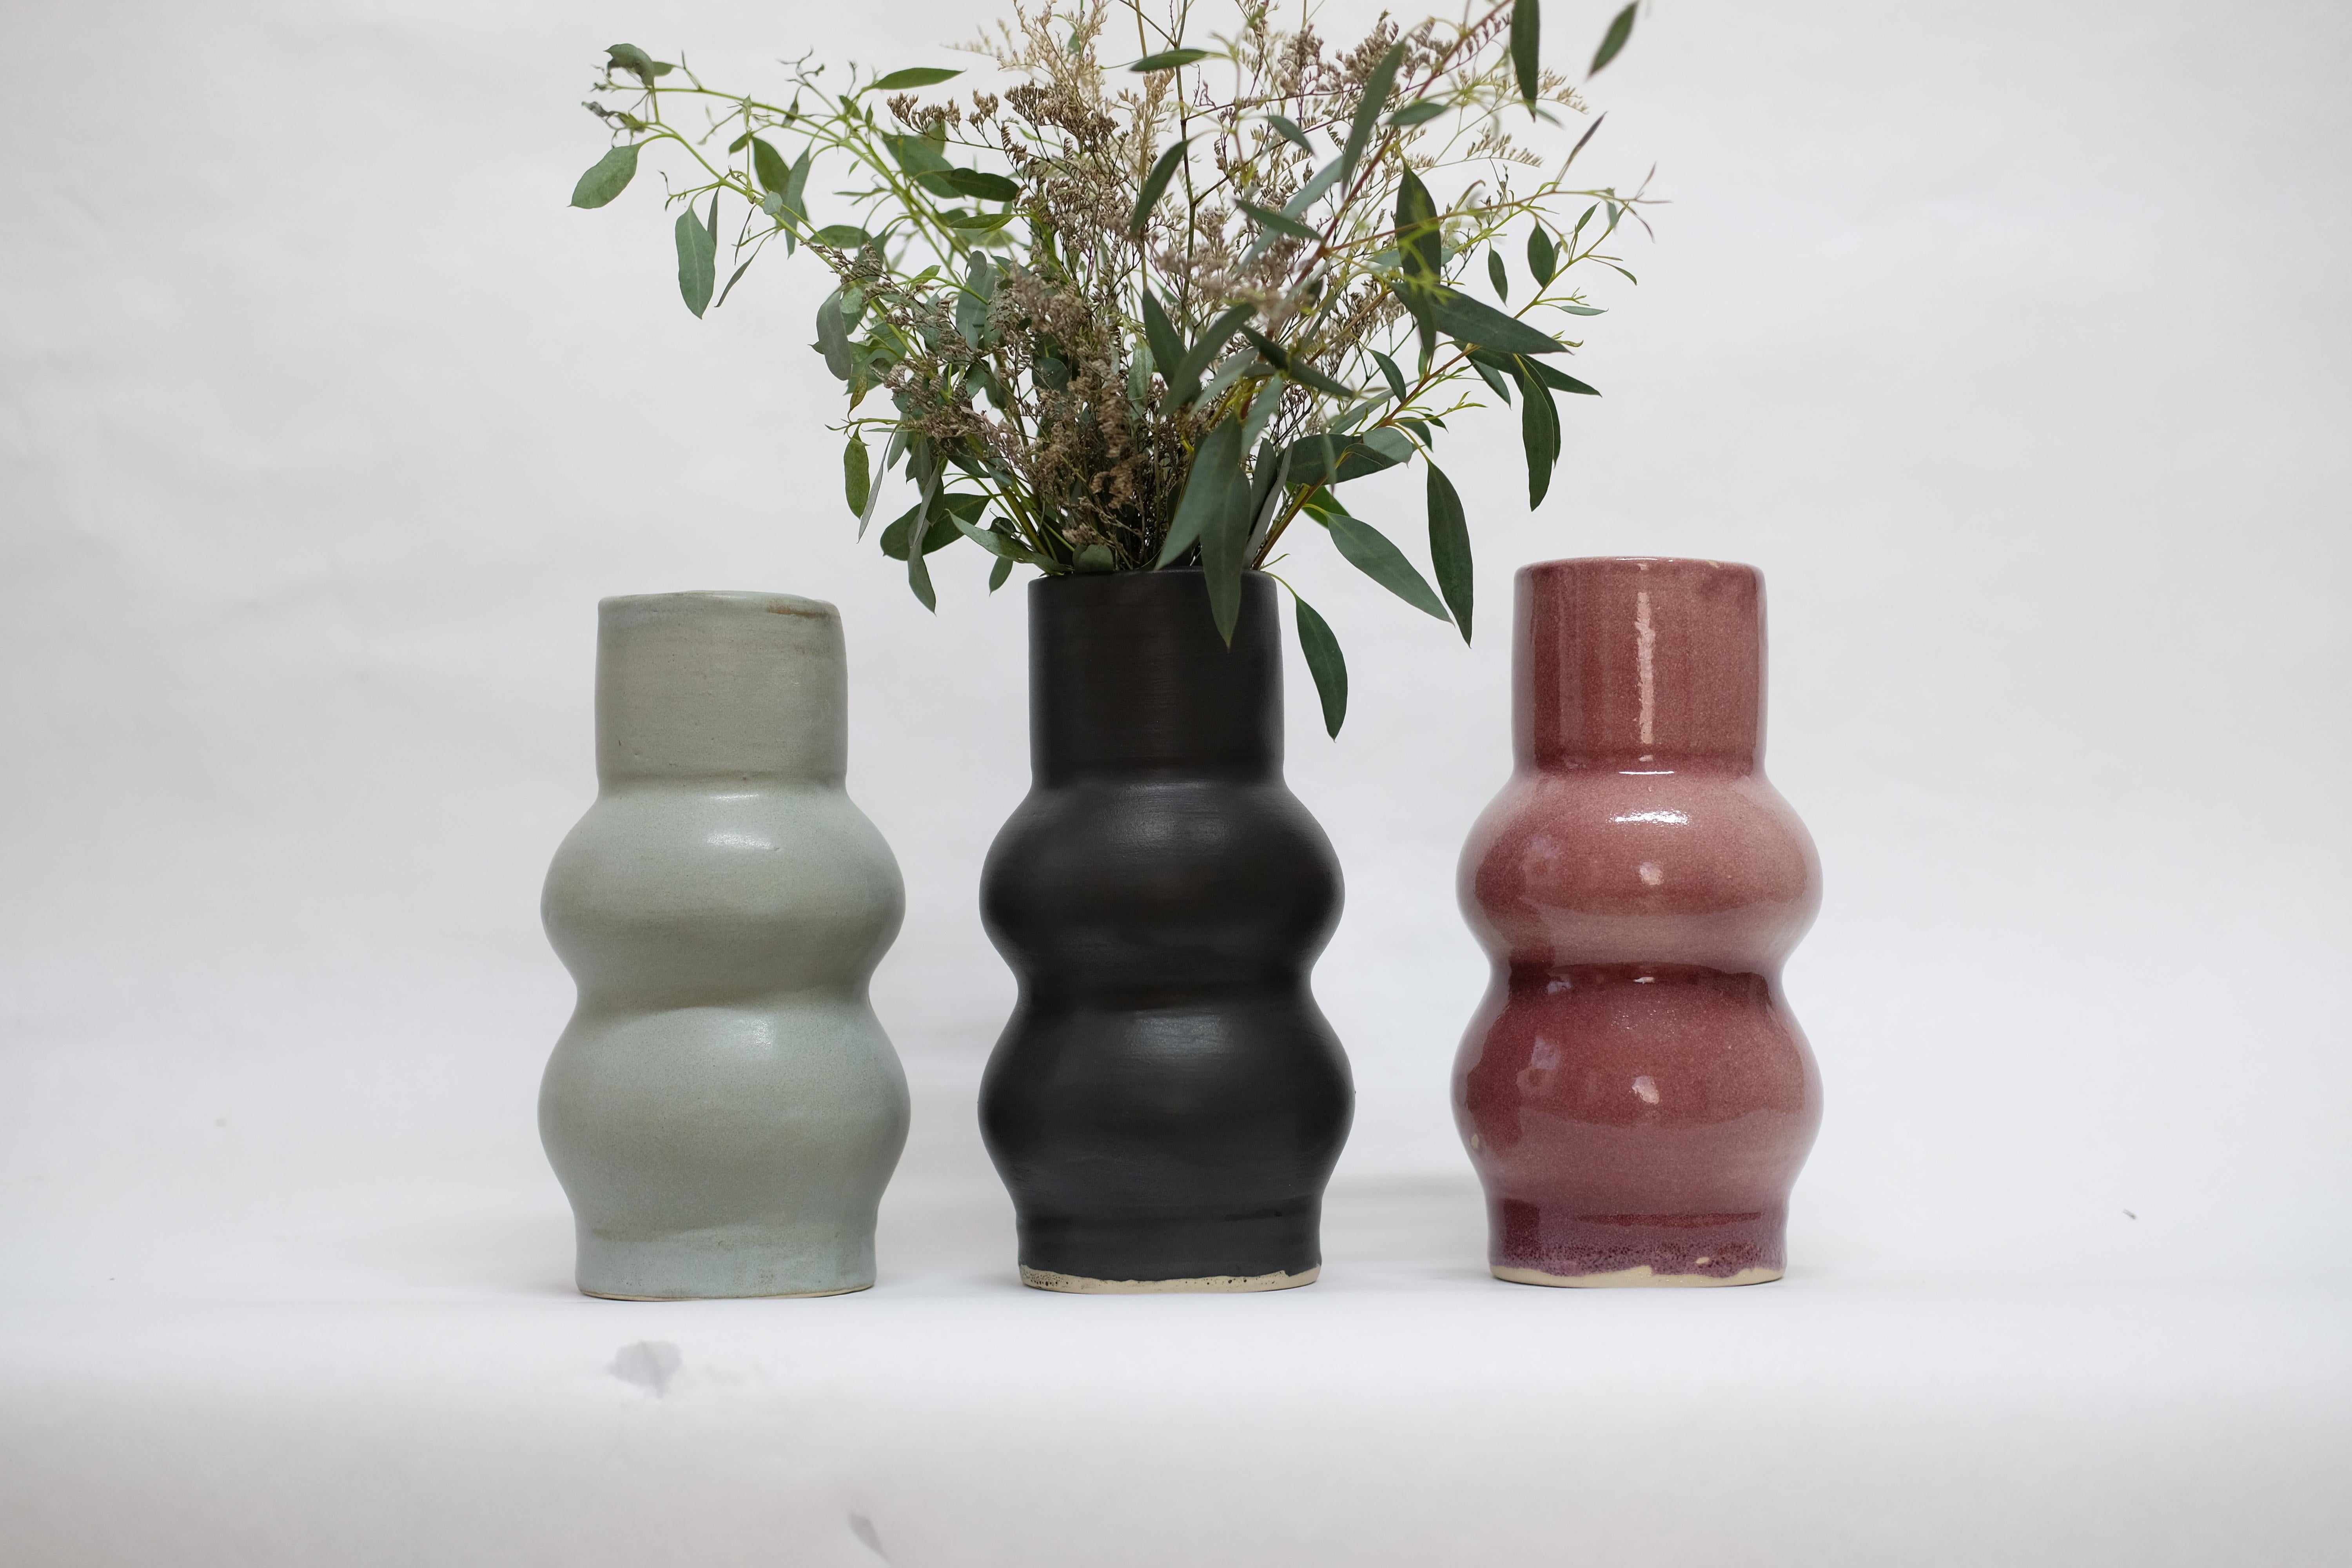 Set of 3 Femme II unique stoneware vase by Camila Apaez
Unique 
Materials: Stoneware
Dimensions: 8 x 8 x 22 cm

This year has been shaped by the topographies of our homes and the uncertainty of our time. We have found solace in the humbleness of